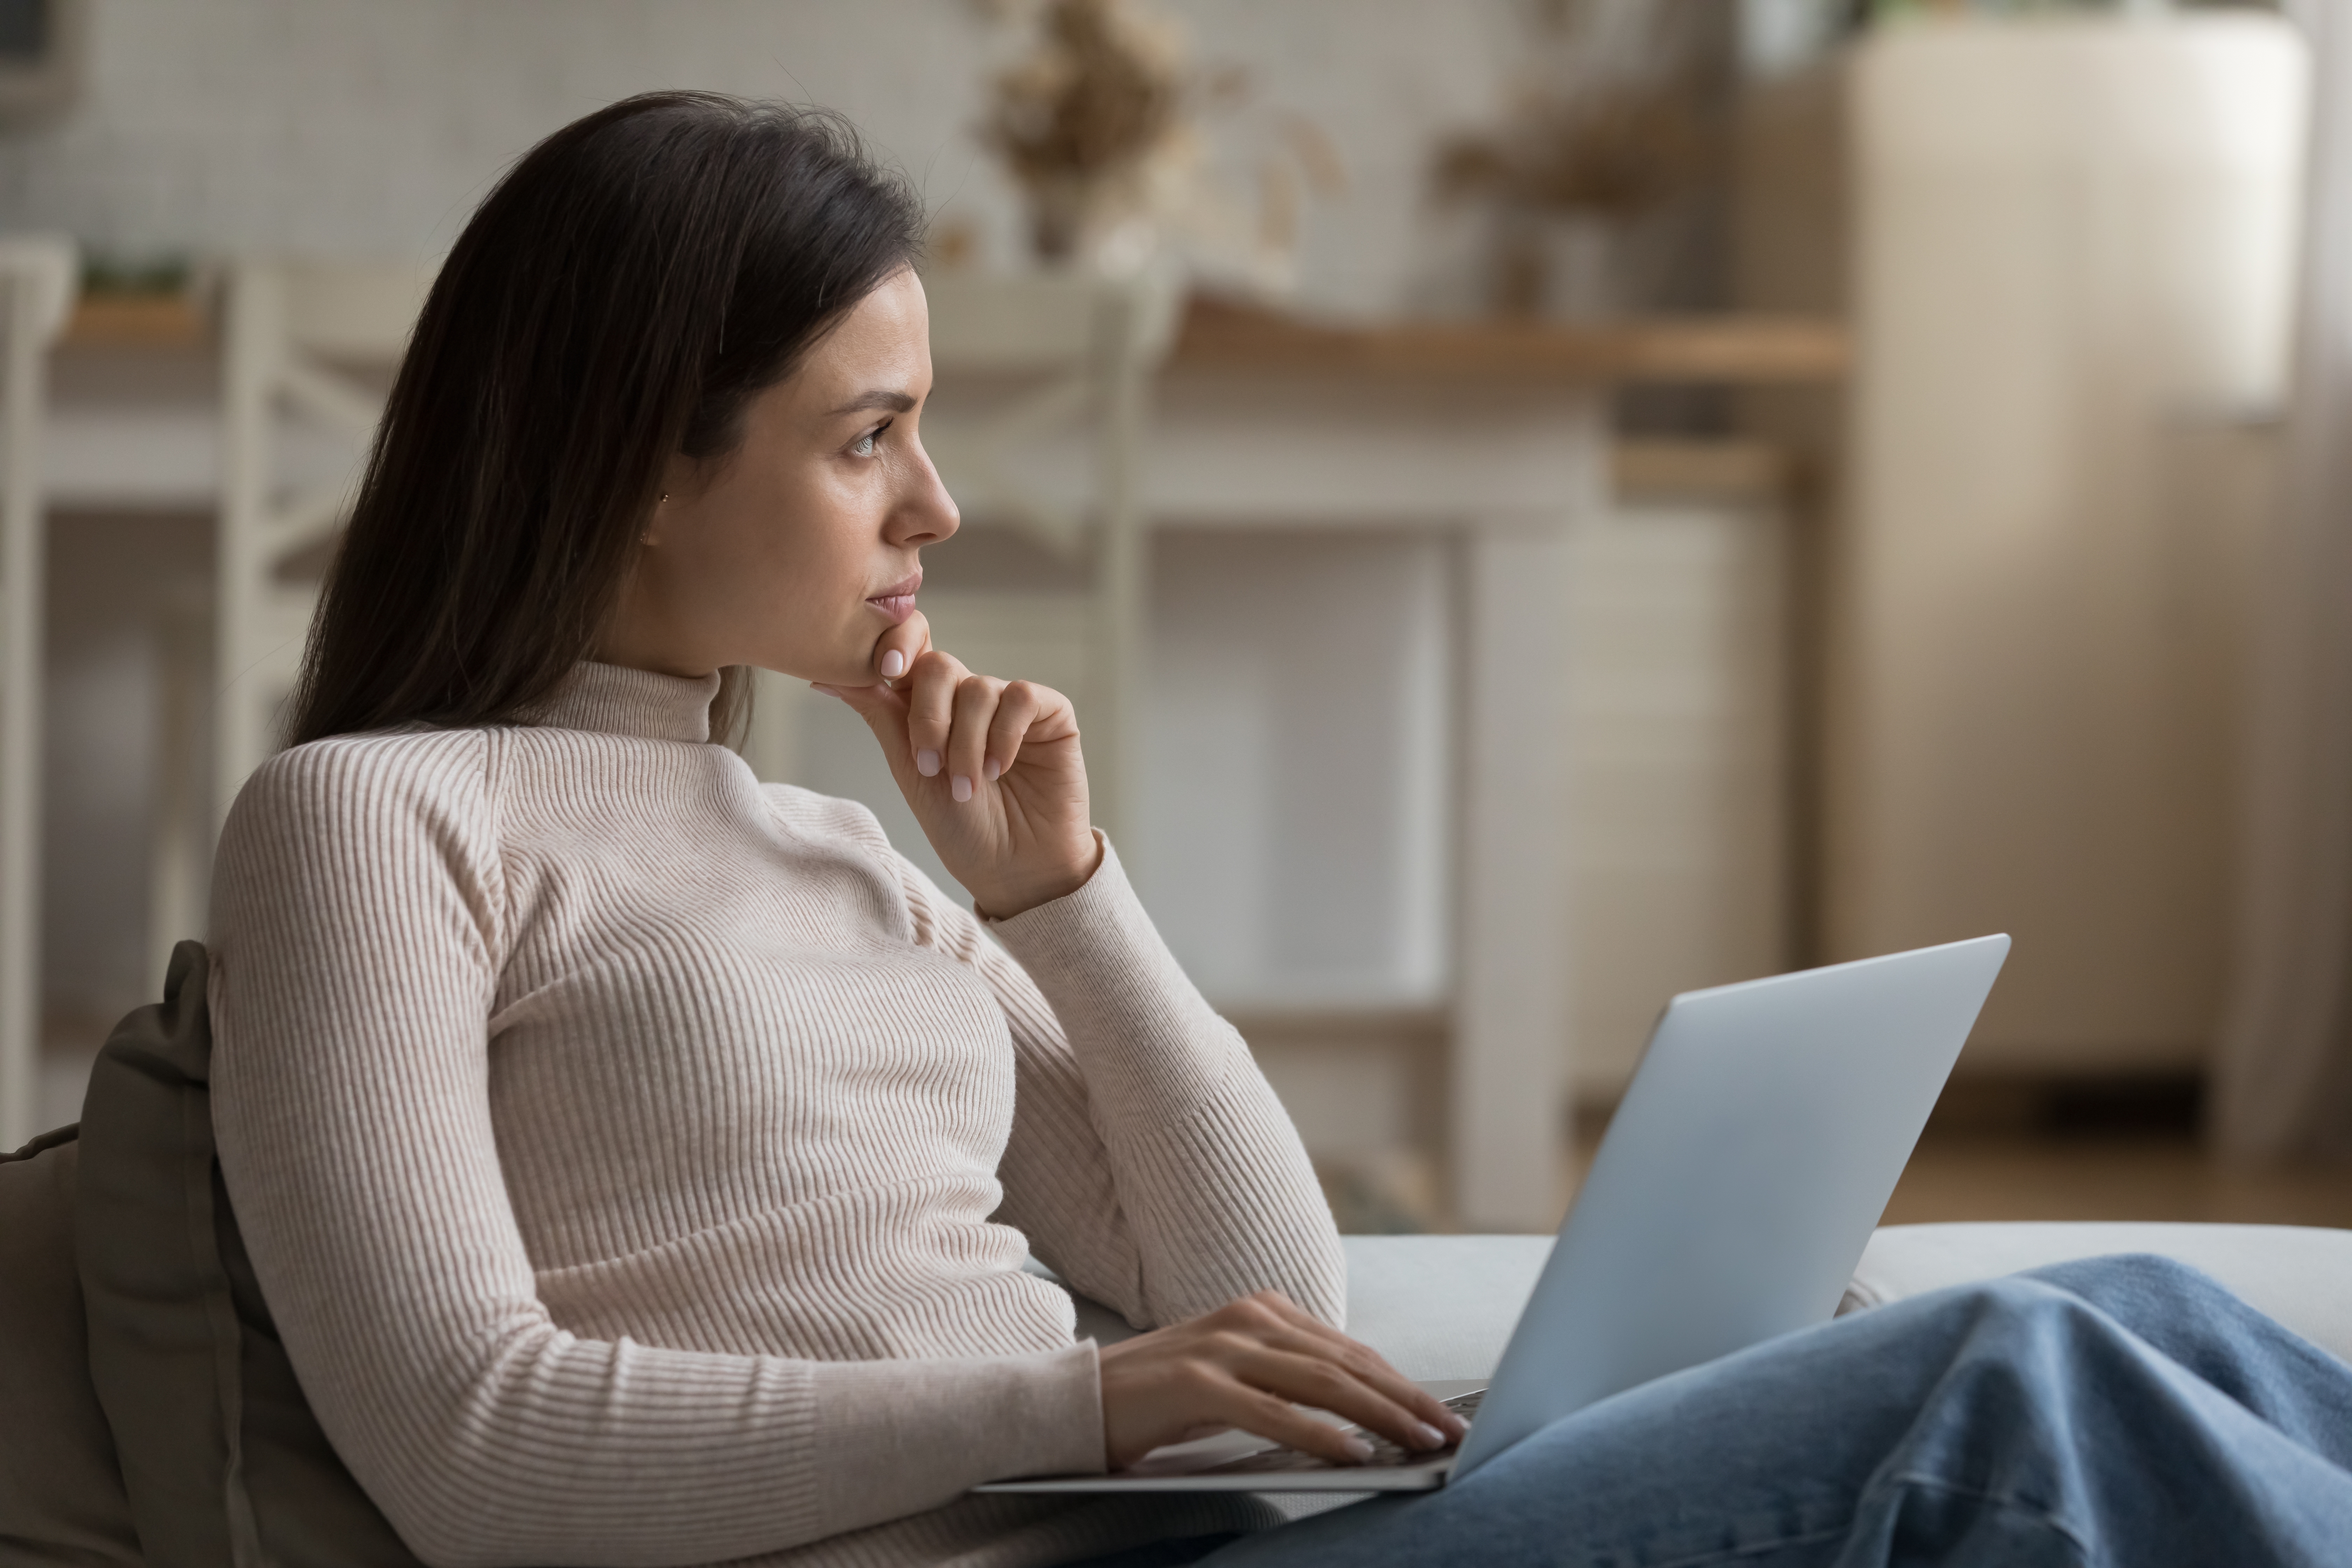 A thoughtful young woman staring into the distance while using her laptop | Source: Shutterstock